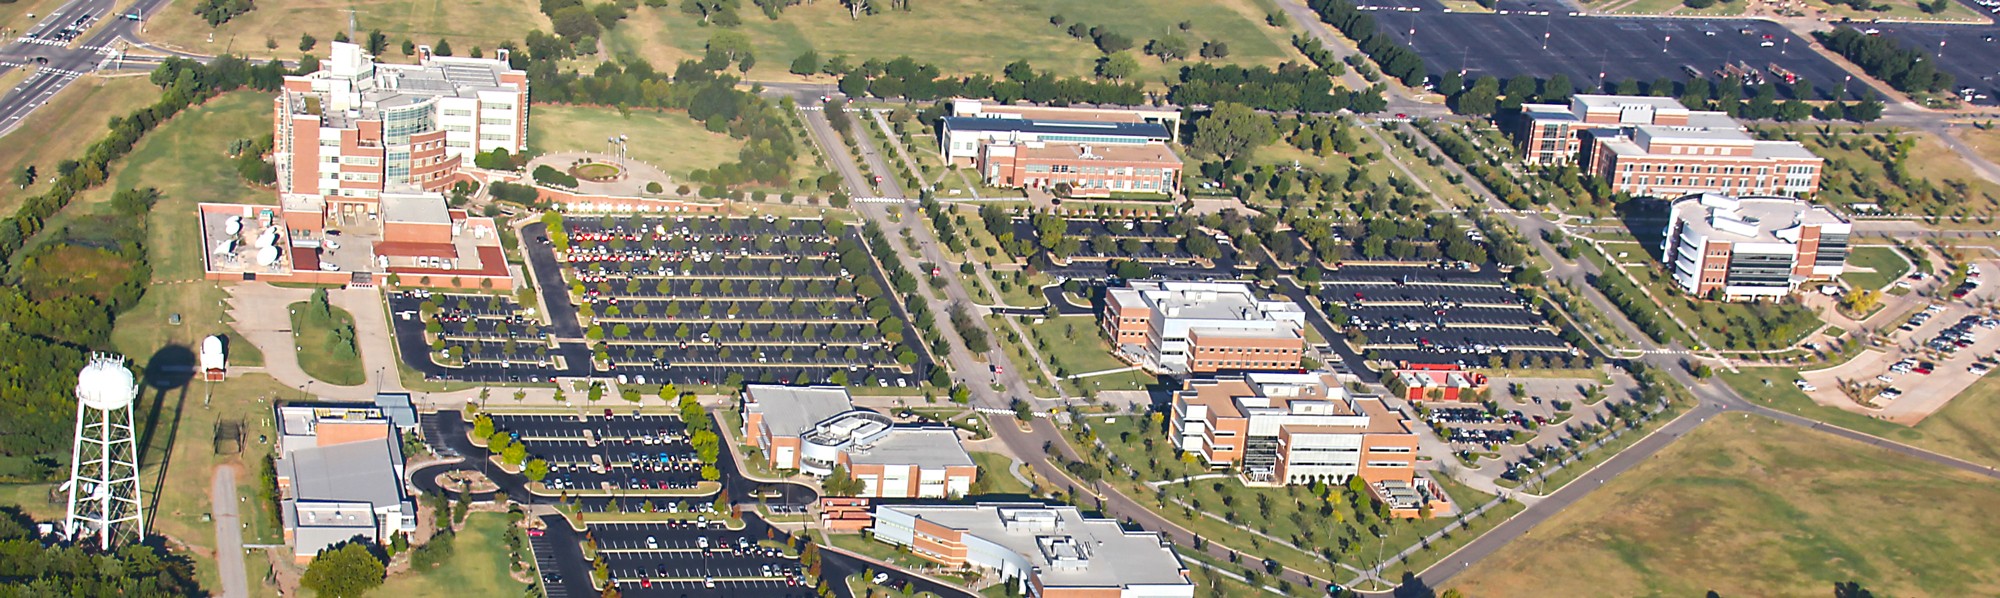 Aerial photo of the research campus